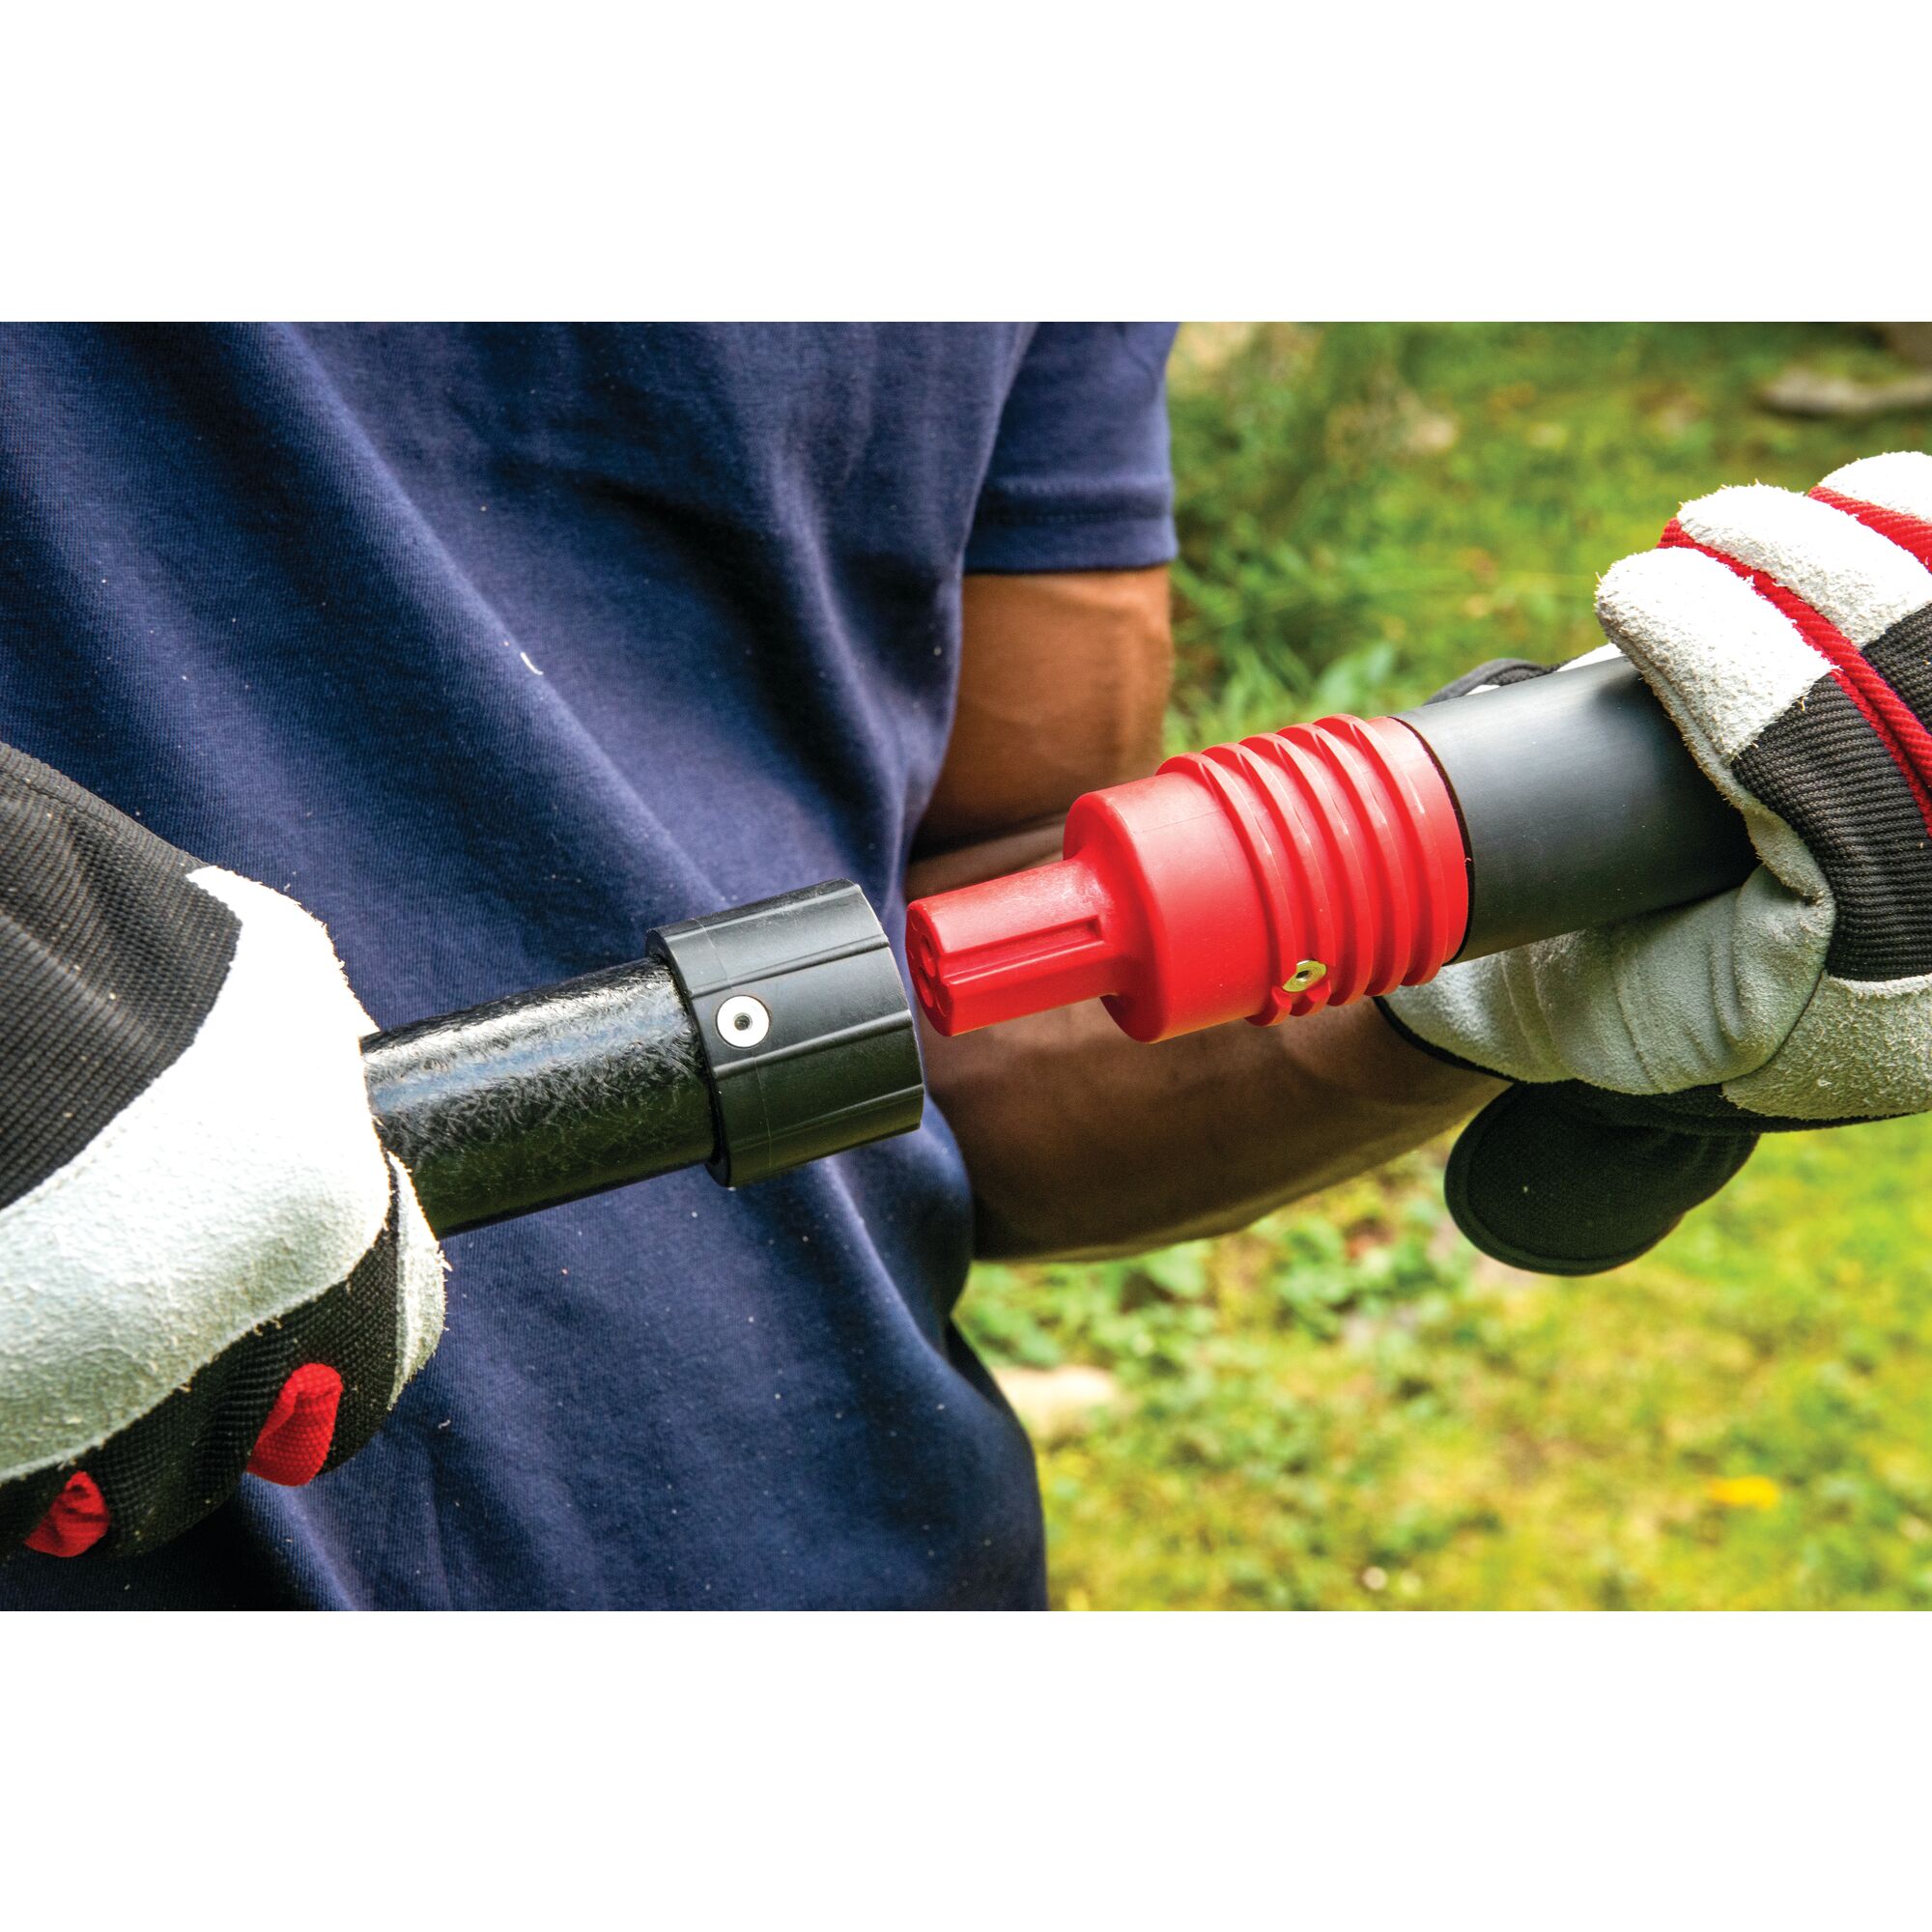 Up to 14 foot reach with extension pole feature of cordless pole chainsaw kit 4 amp hour.